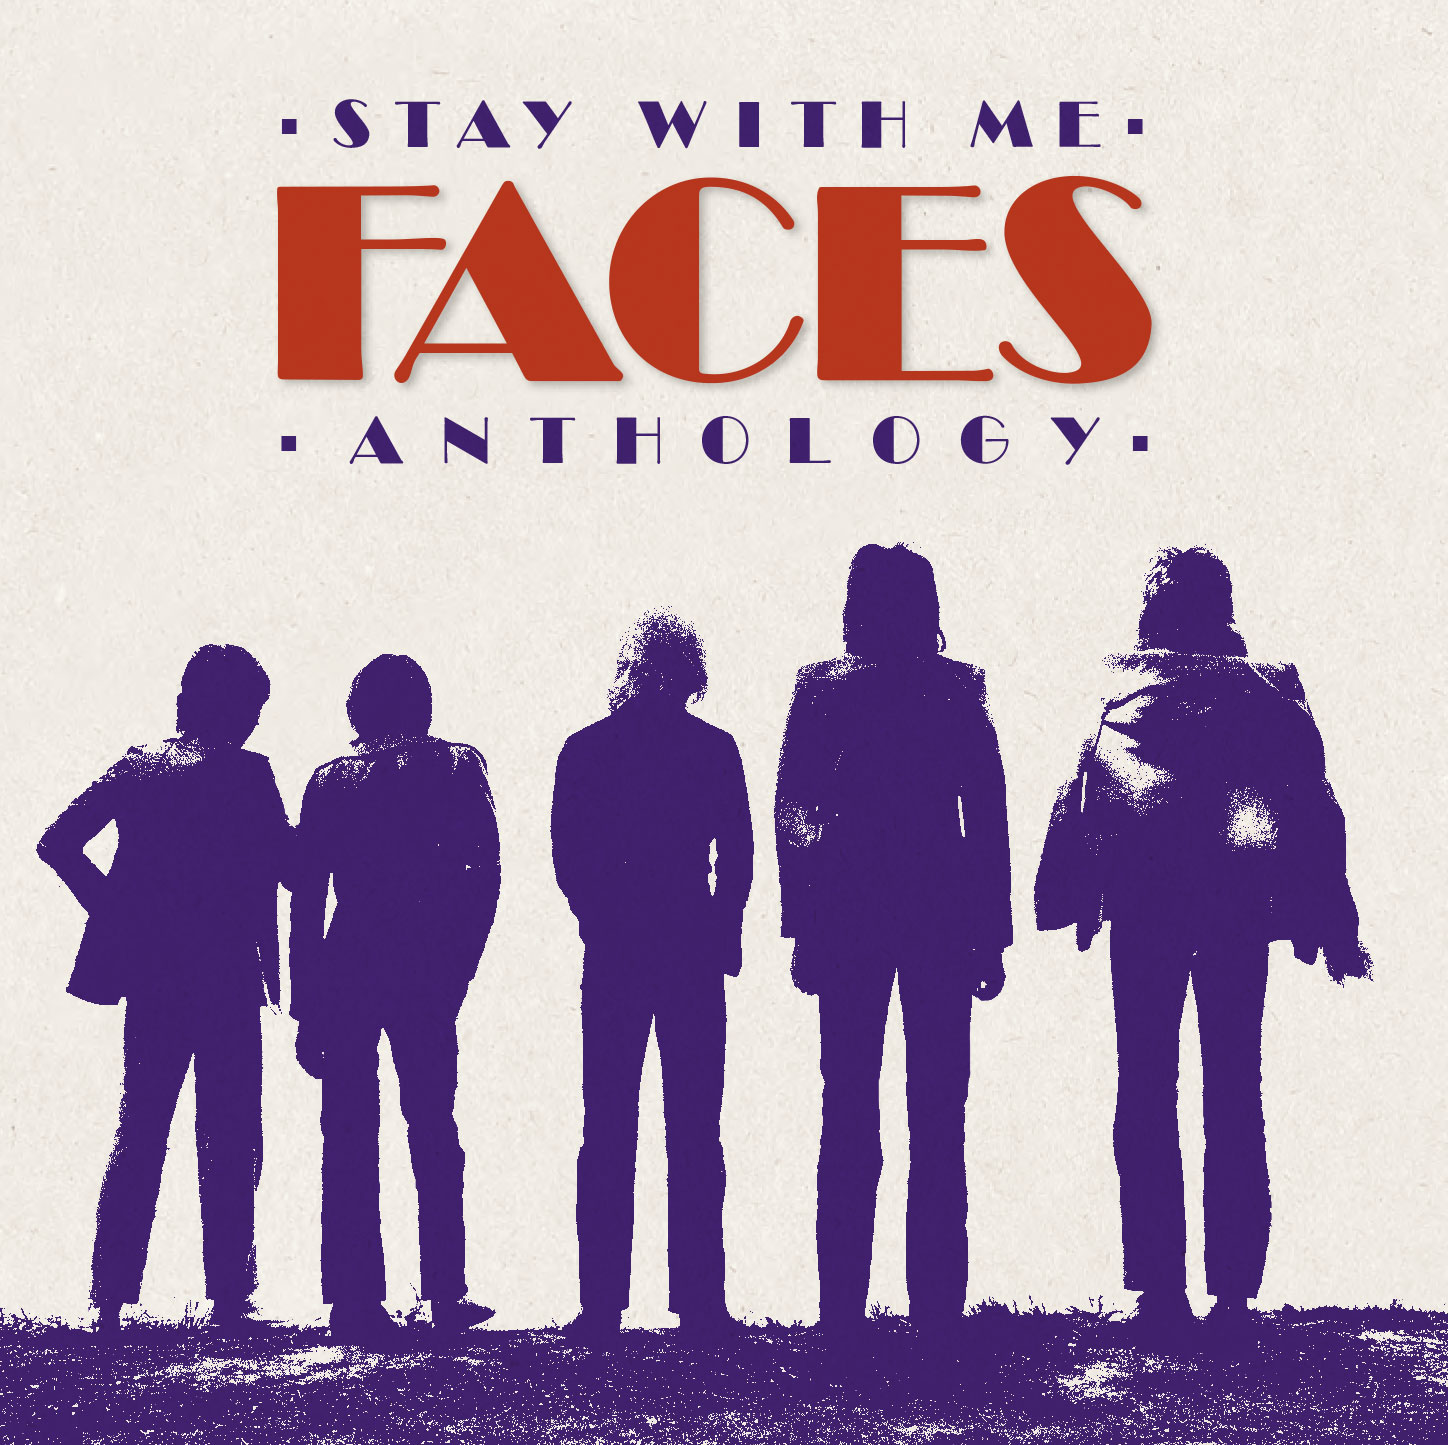 Stay with Me - Faces Anthology